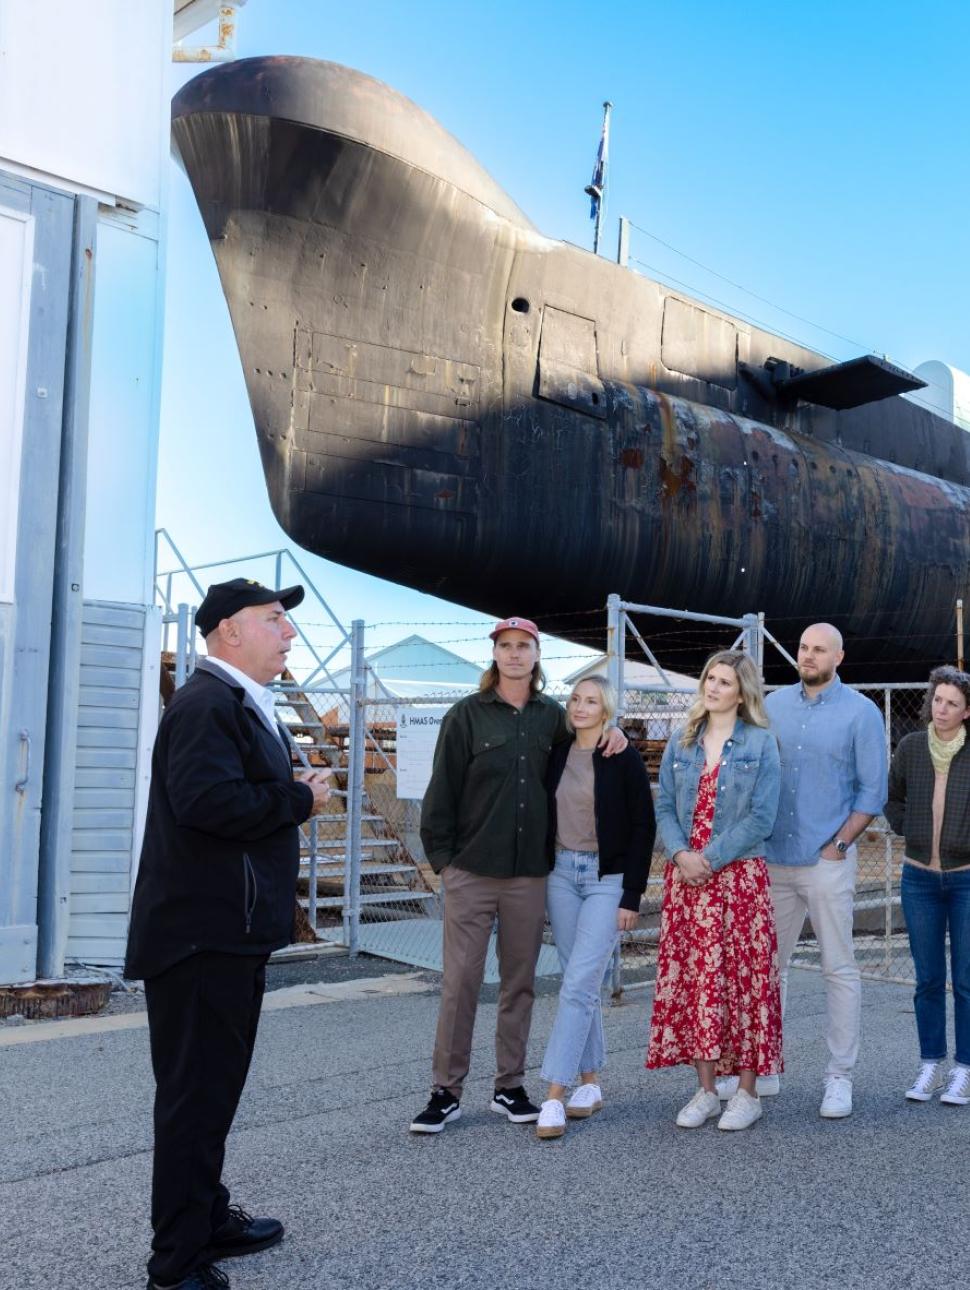 A submarine volunteer speaks to a group of visitors in a semi circle, standing in front of the submarine HMAS ovens